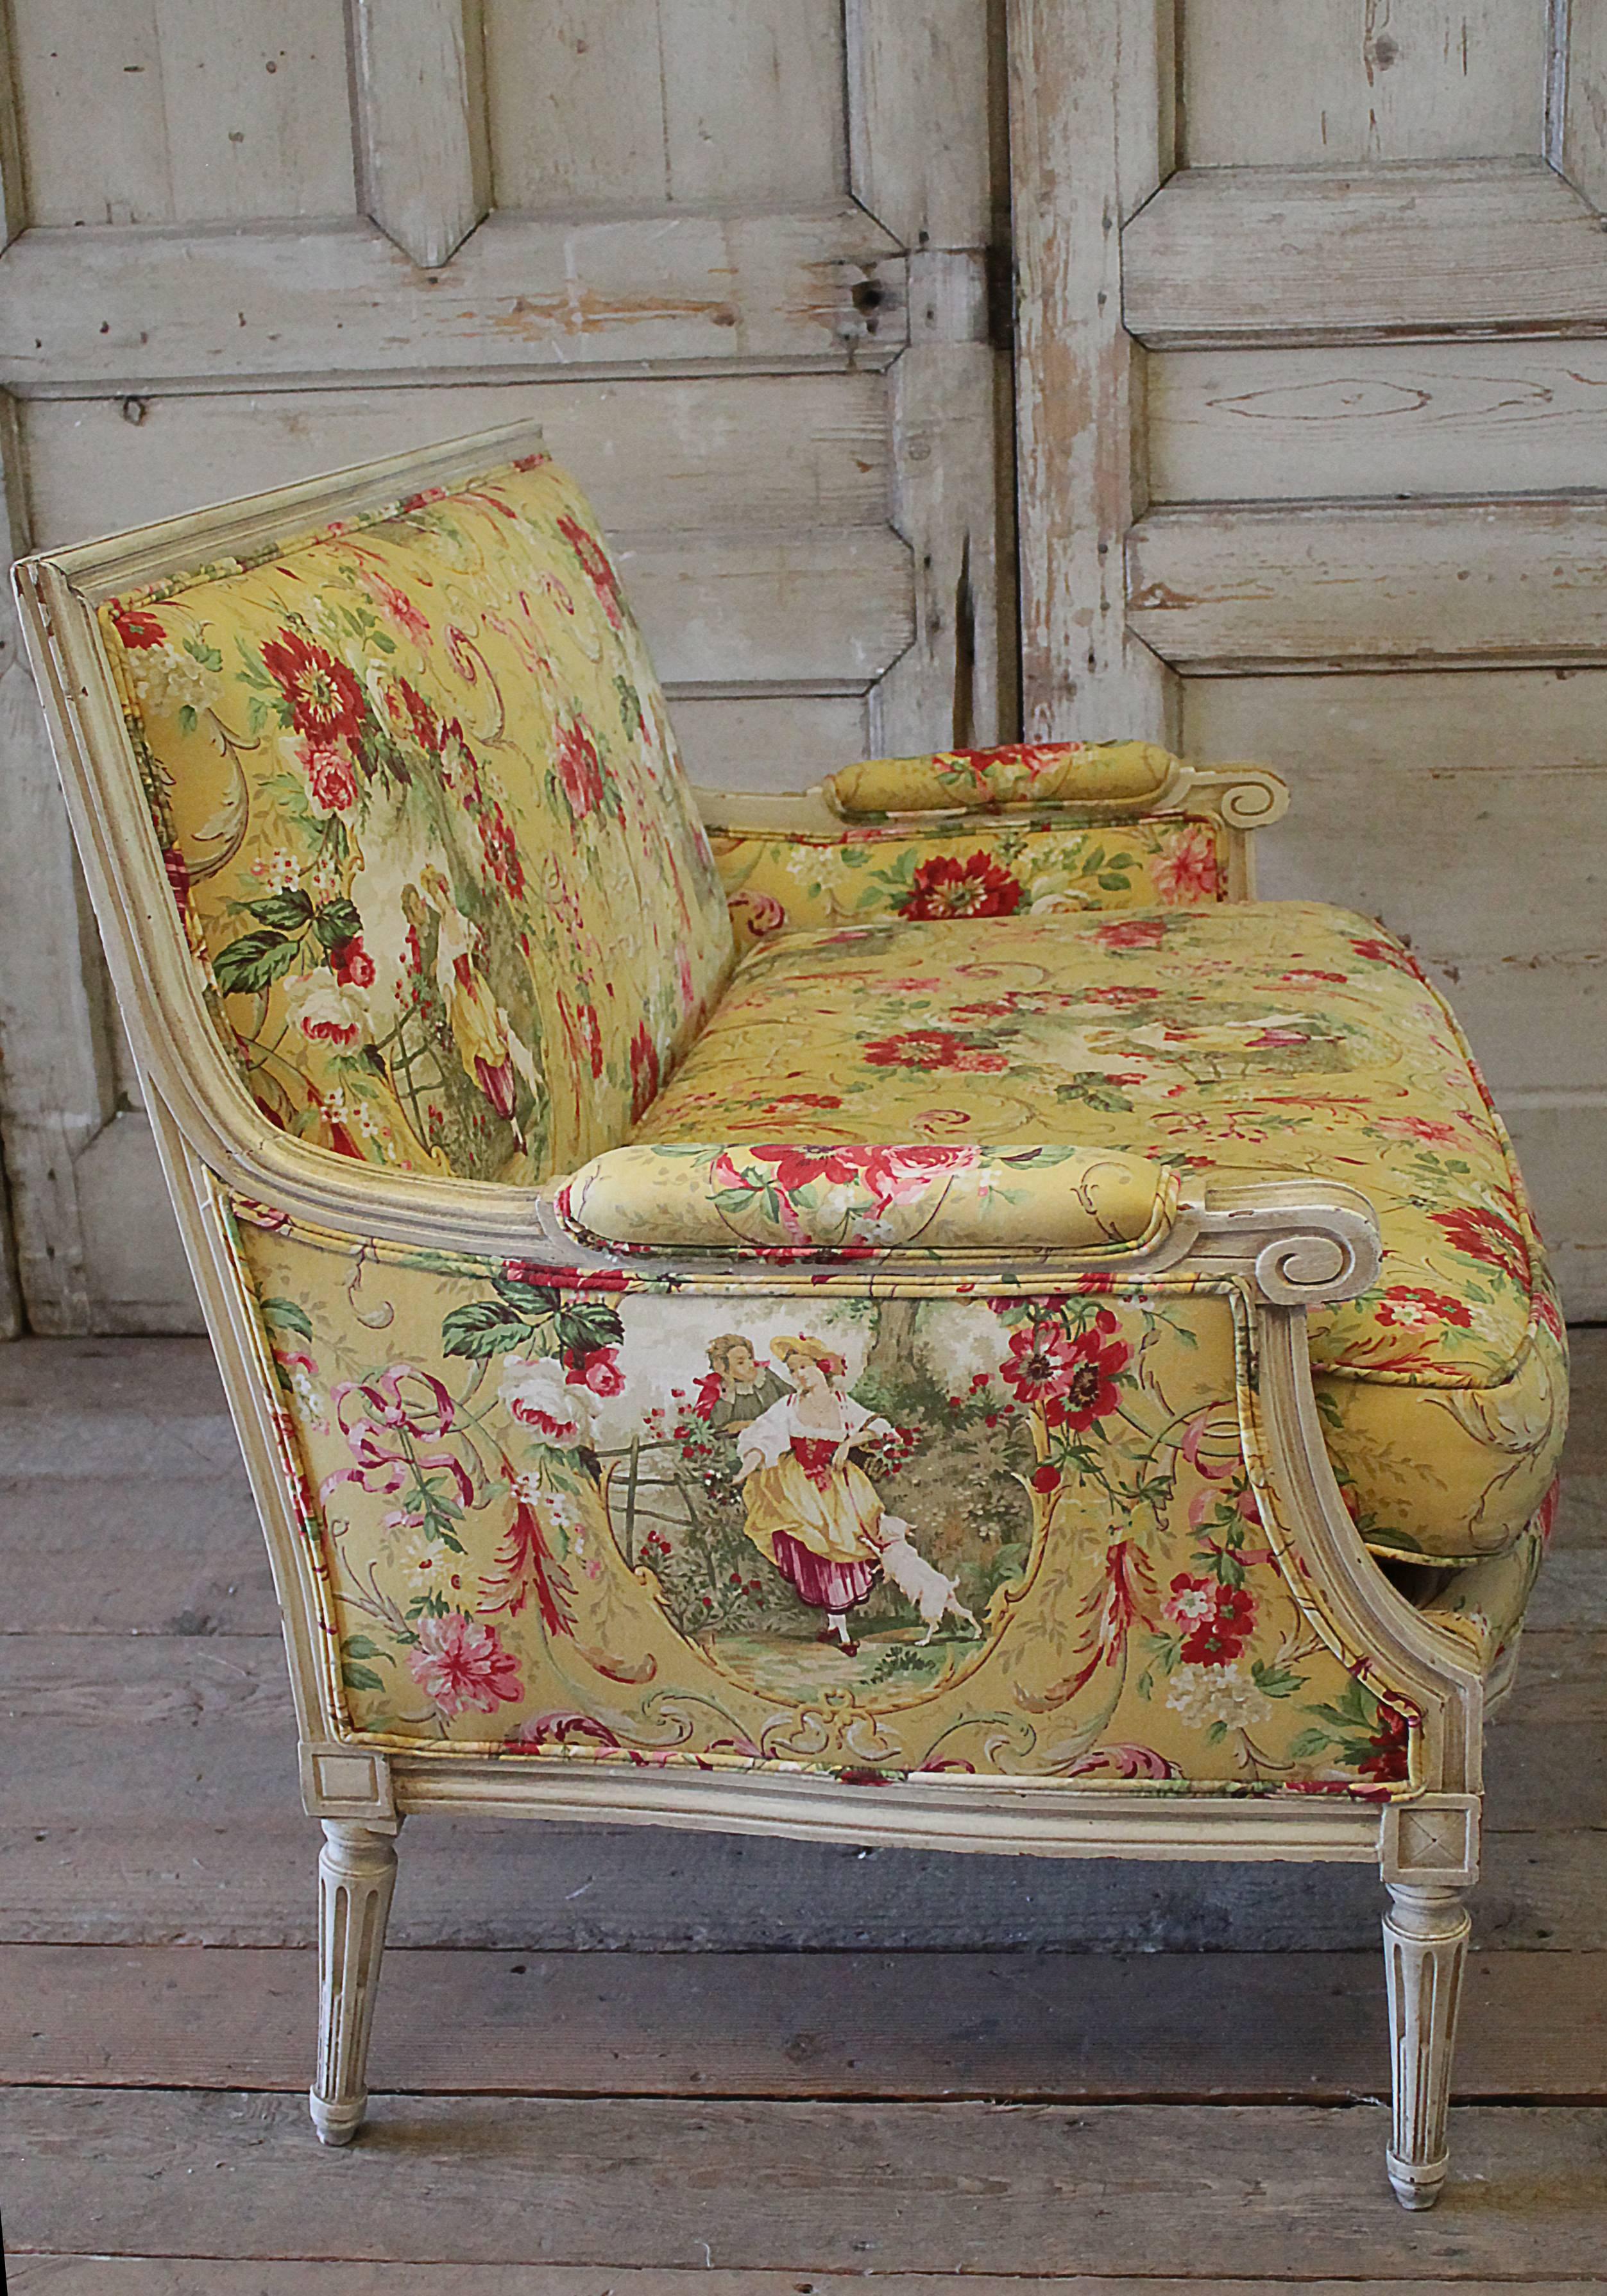 Early 20th Century Toile De Jouy Upholstered Louis XVI Style Settee 1